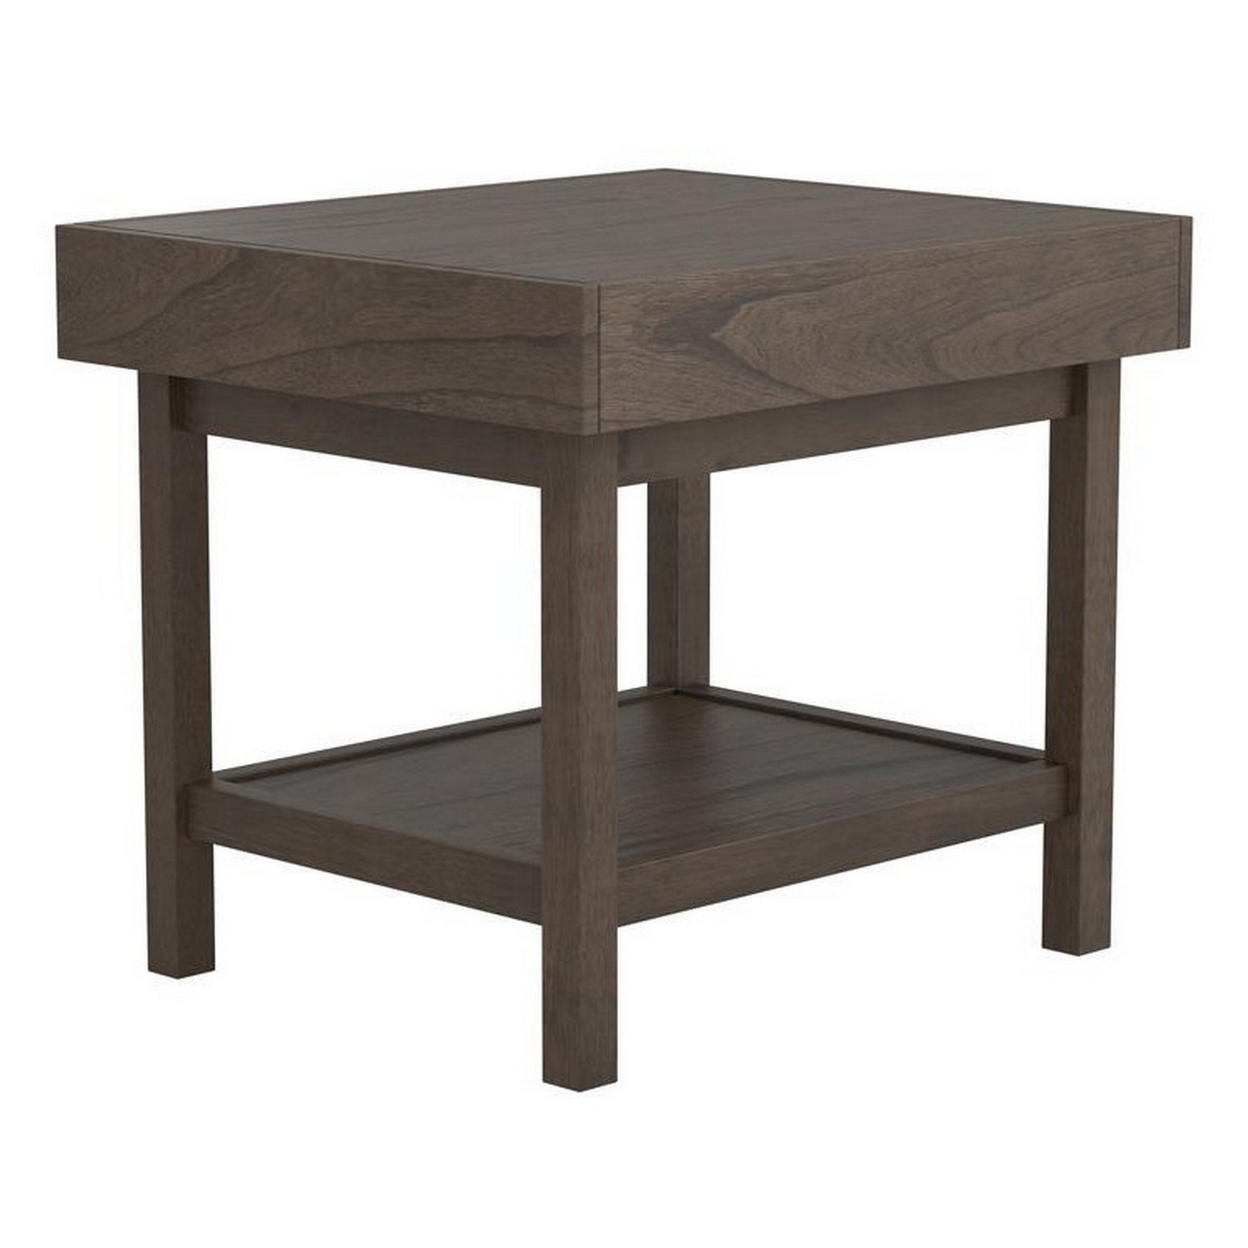 Rectangular Wooden Top End Table With 1 Hidden Drawer, Taupe Gray- Saltoro Sherpi